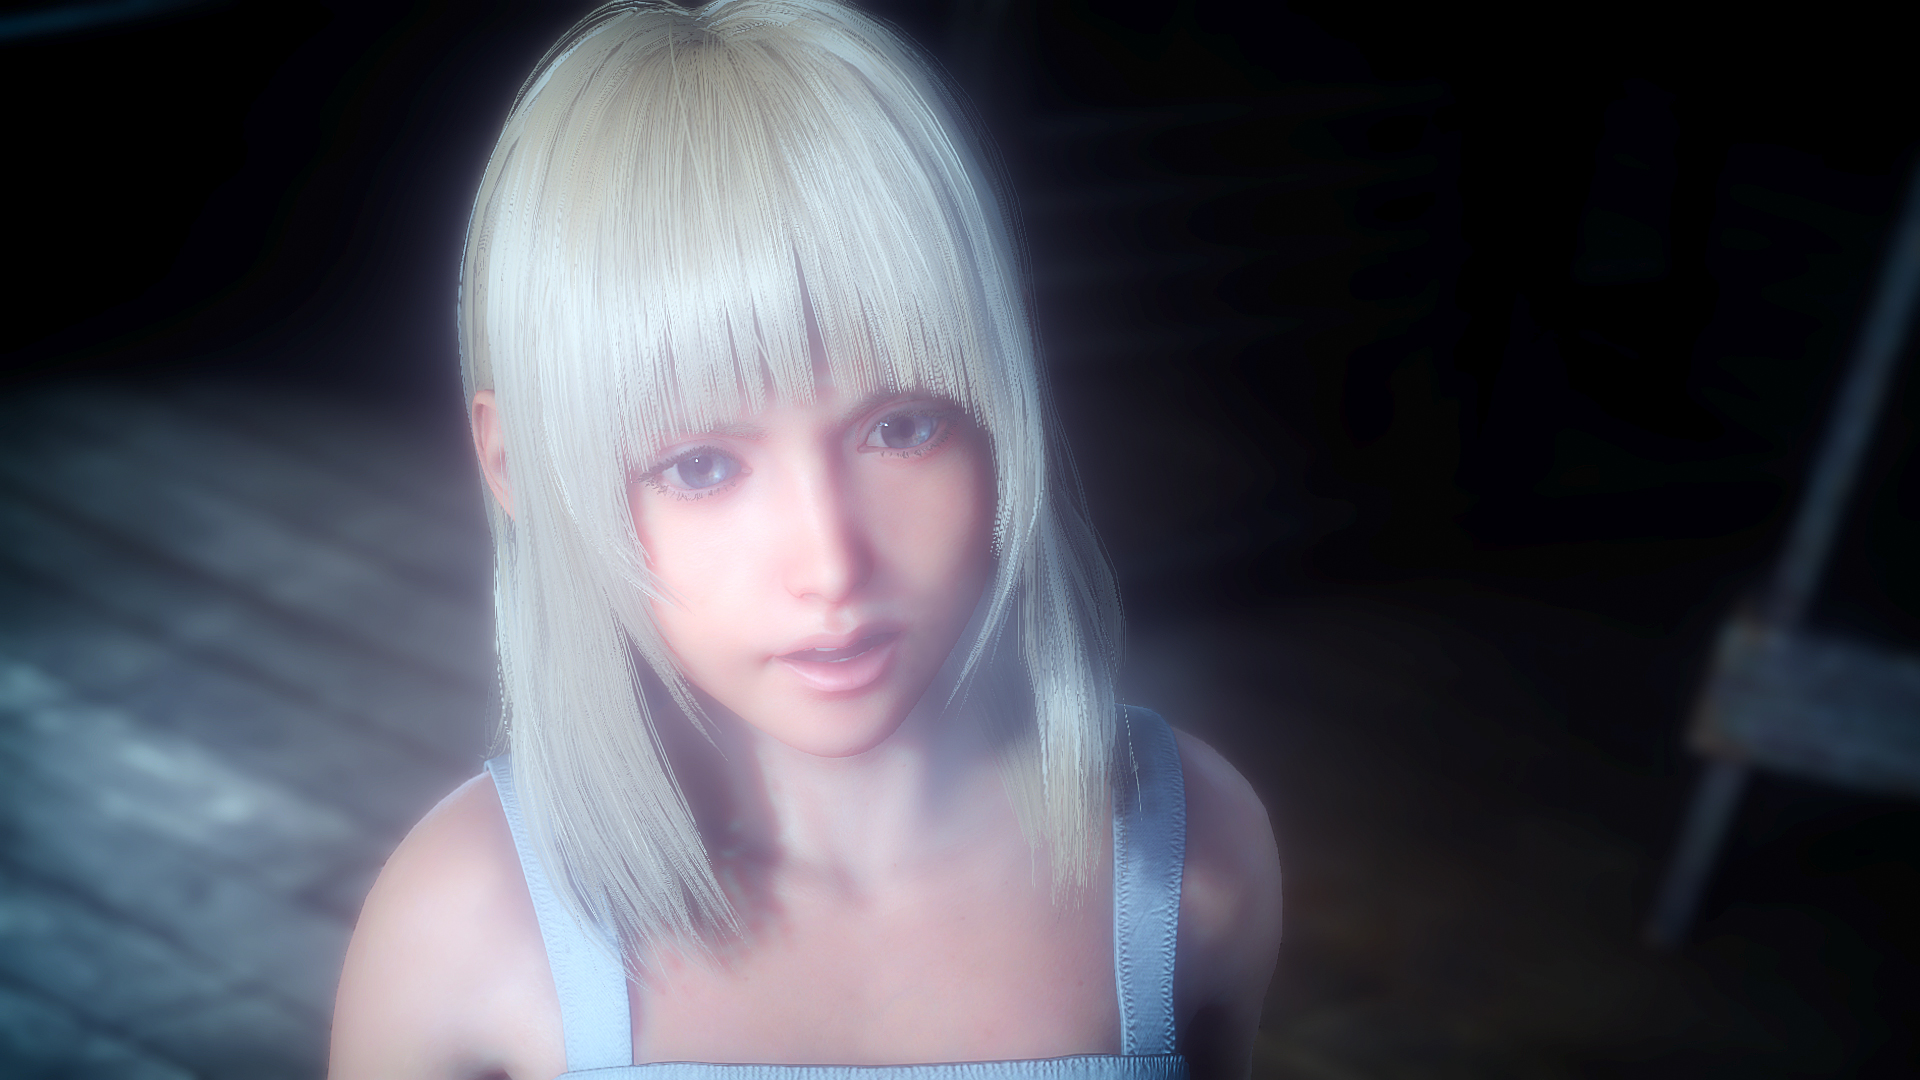 Media asset in full size related to 3dfxzone.it news item entitled as follows: Square Enix pubblica un nuovo gameplay trailer di Final Fantasy XV | Image Name: news23718_Final-Fantasy-XV-Screenshot_7.jpg